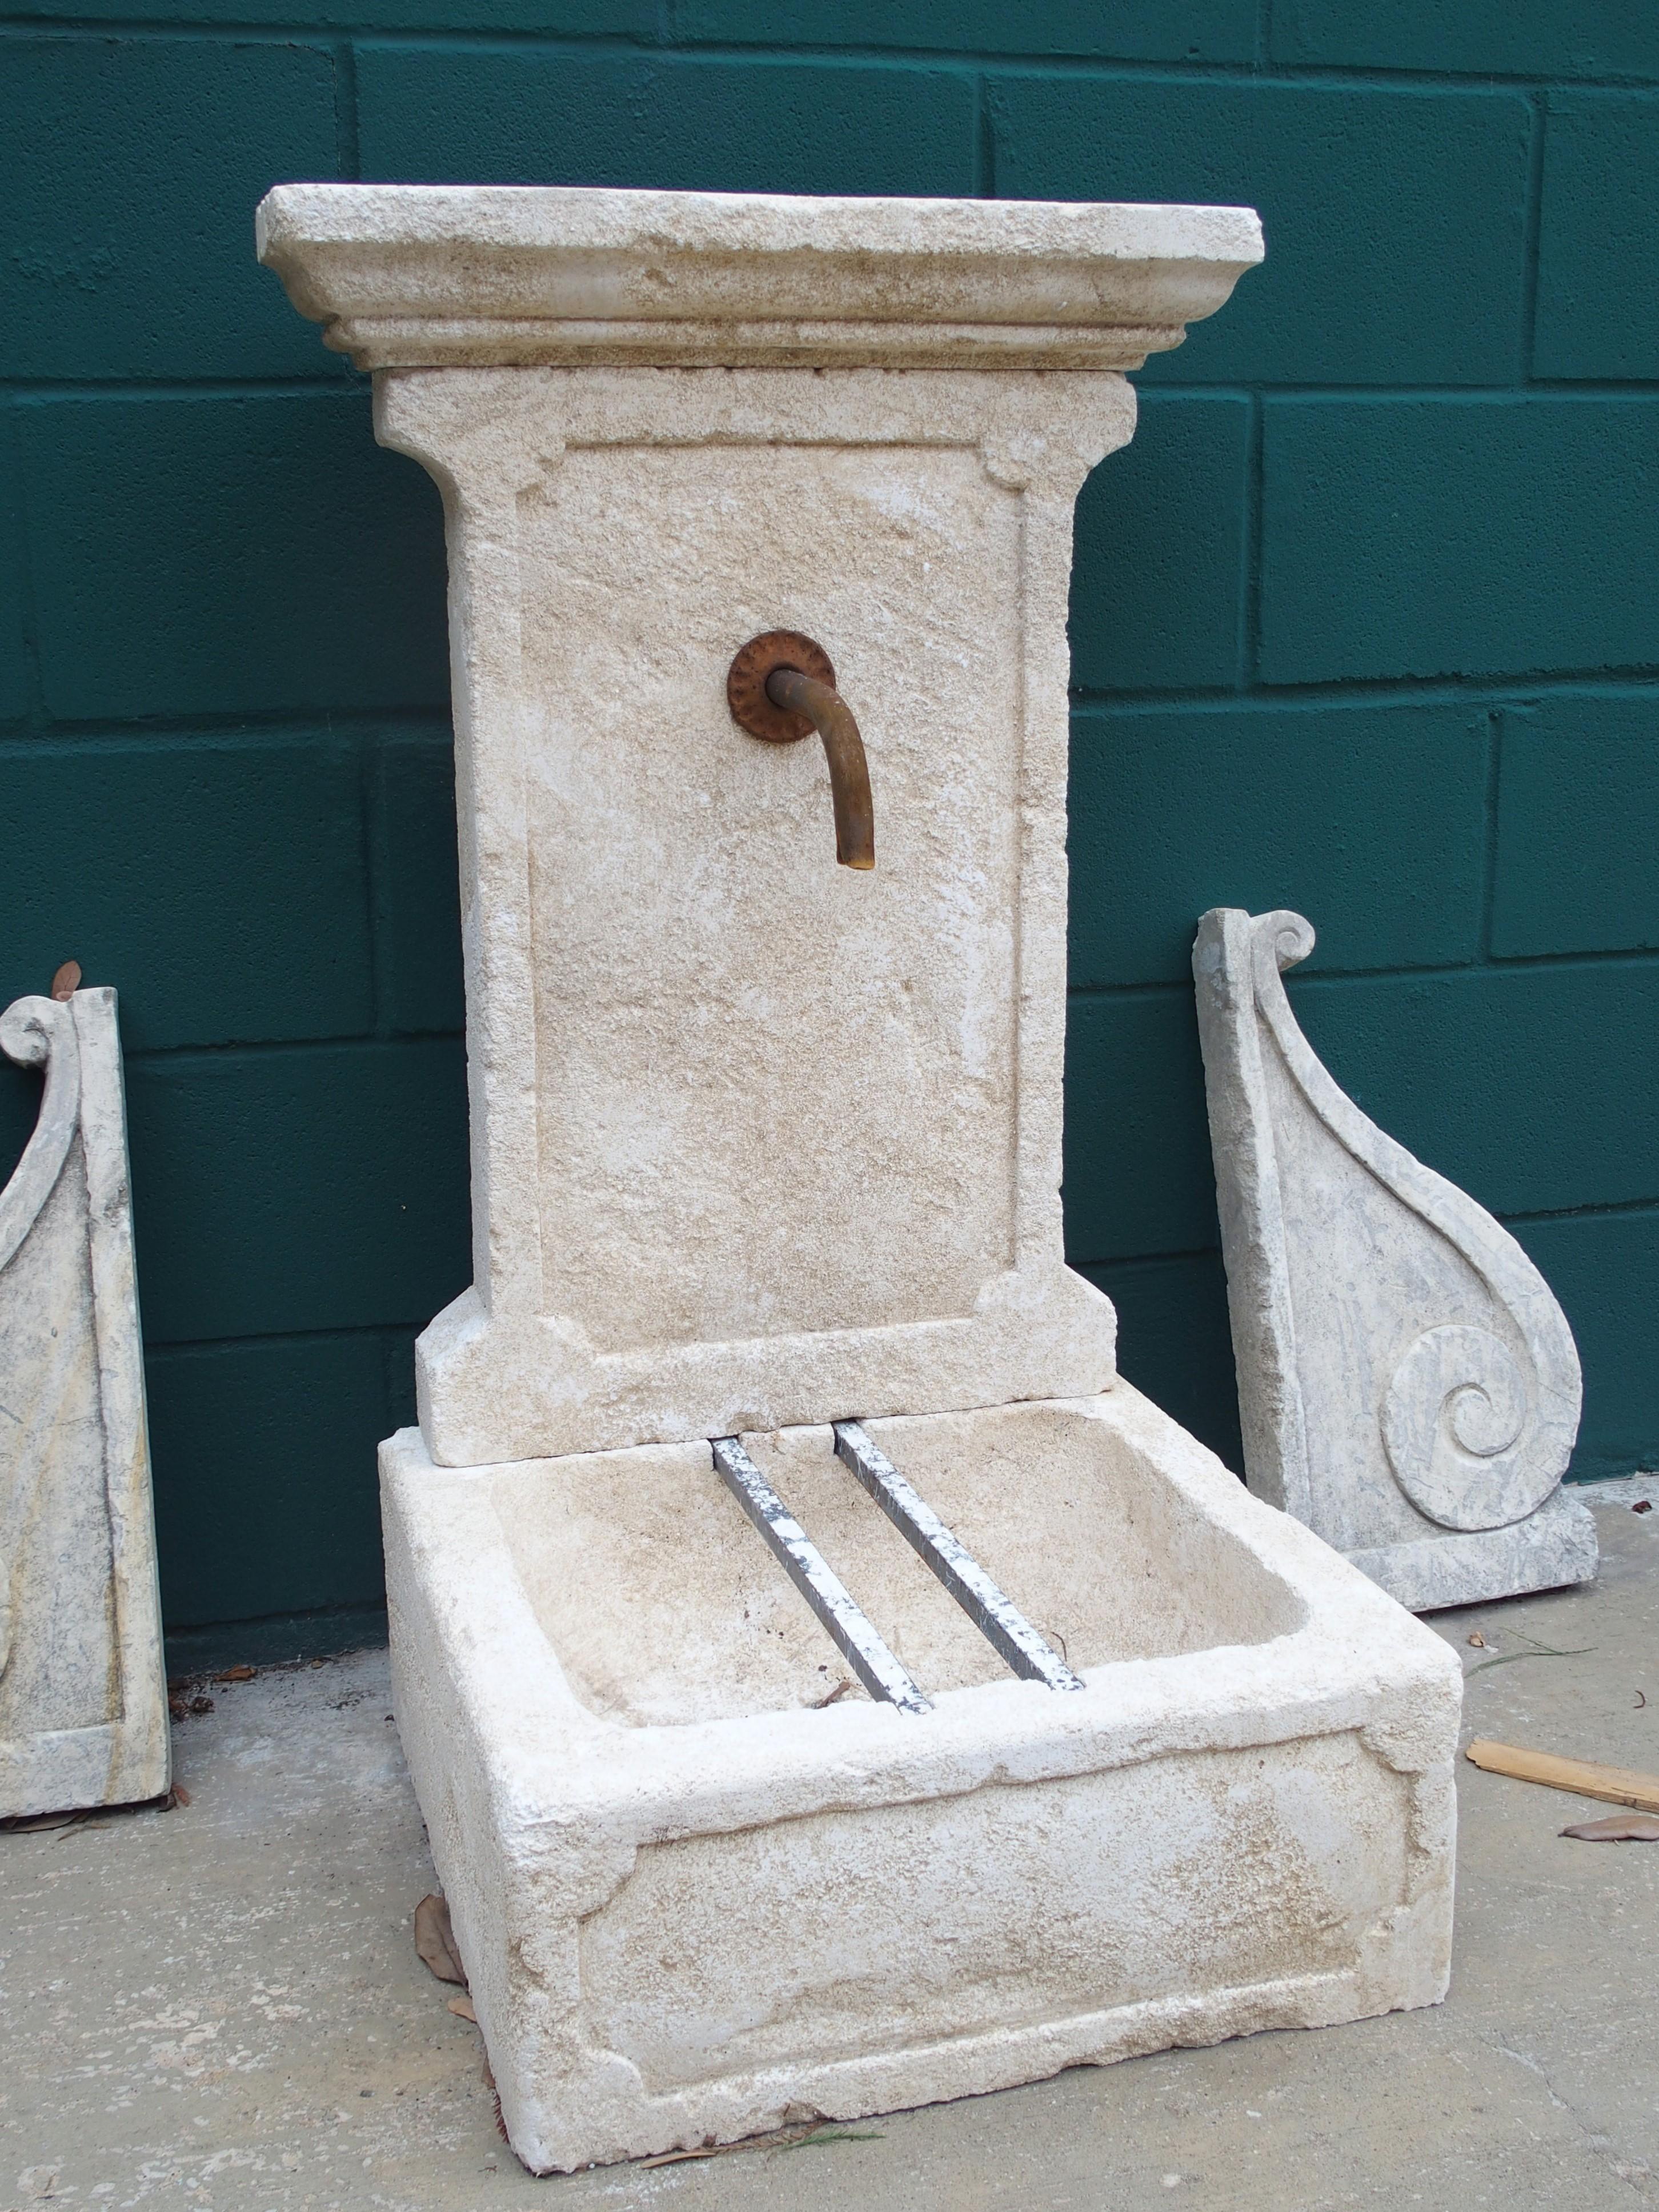 This small wall fountain from Provence, France has been hand-carved in three sections.  A rectangular crown with several layers of molding tops the vertical back wall which is adorned with thick molding and protruding corners.  It has an in-carved